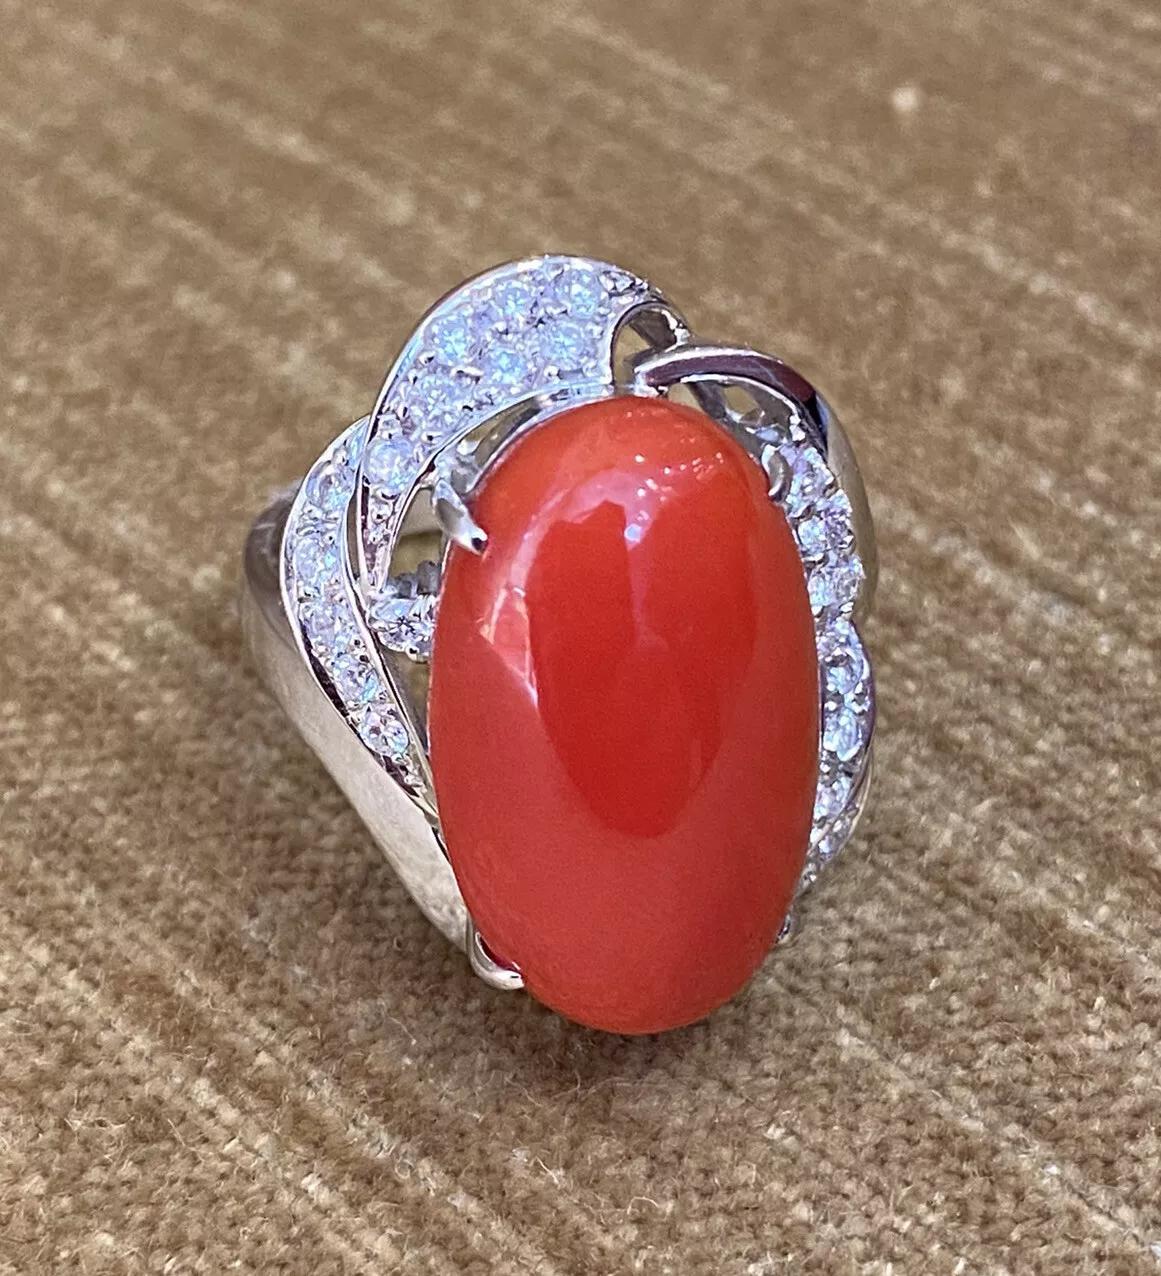 Estate Coral and Diamond Ring in Platinum

Estate Coral and Diamond Ring features a Large Oval Red Coral in the center accented by 23 Round Brilliant cut Diamonds in Platinum.

Diamond total weight is 0.51 carats.

Ring size is 7.25
Ring weighs 14.2